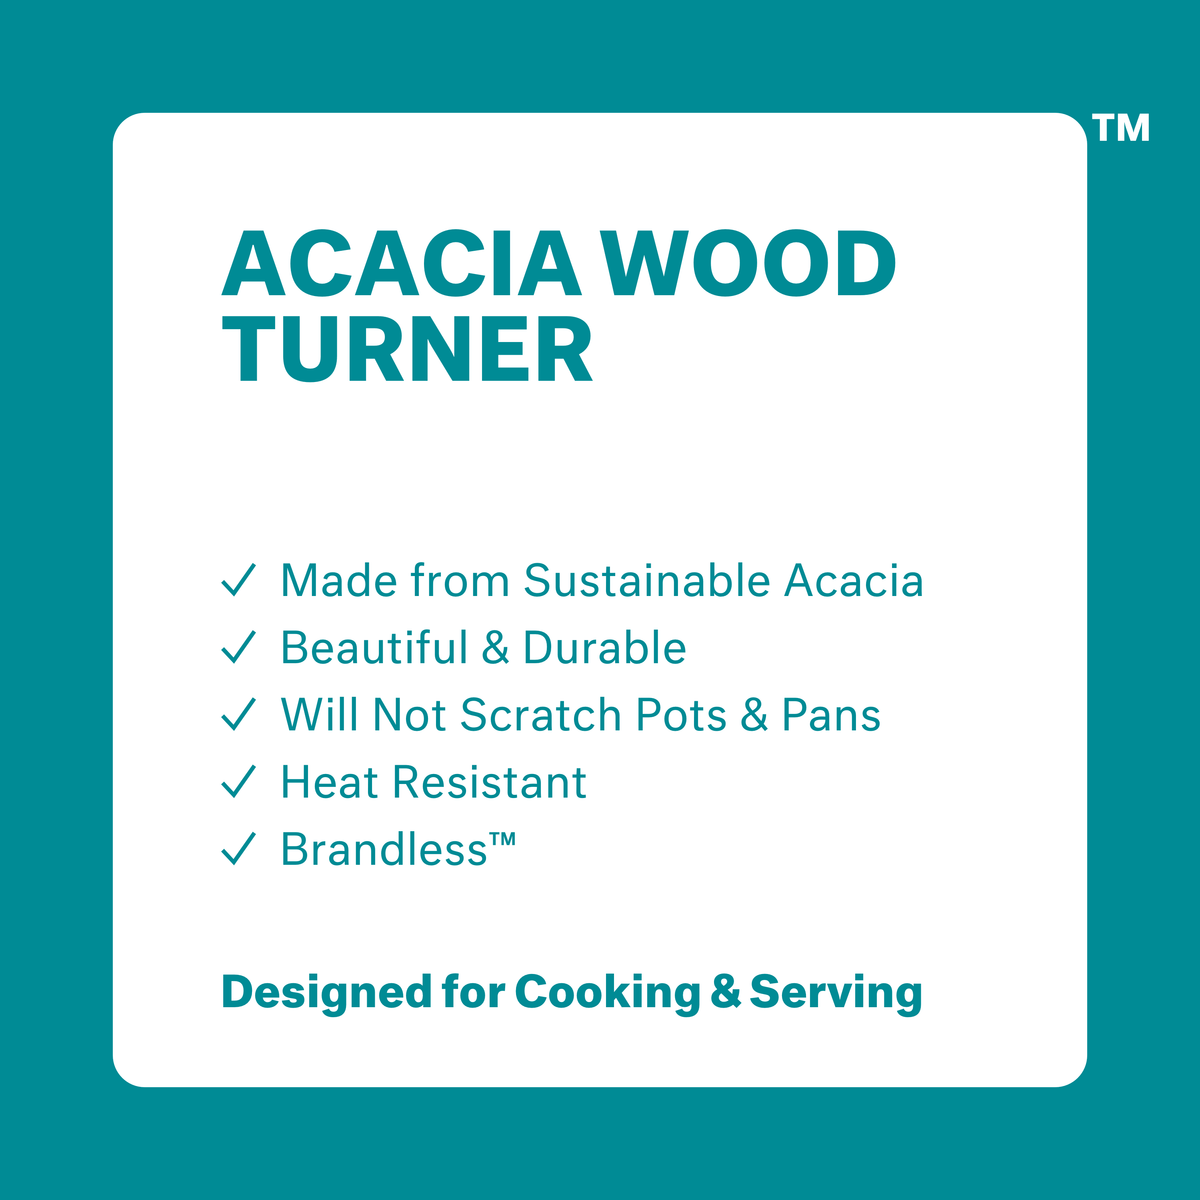 Acacia Wood Turner: made from sustainable acacia, beautiful &amp; durable, will not scratch pots and pans, heat resistant, Brandless. Designed for cooking and serving.